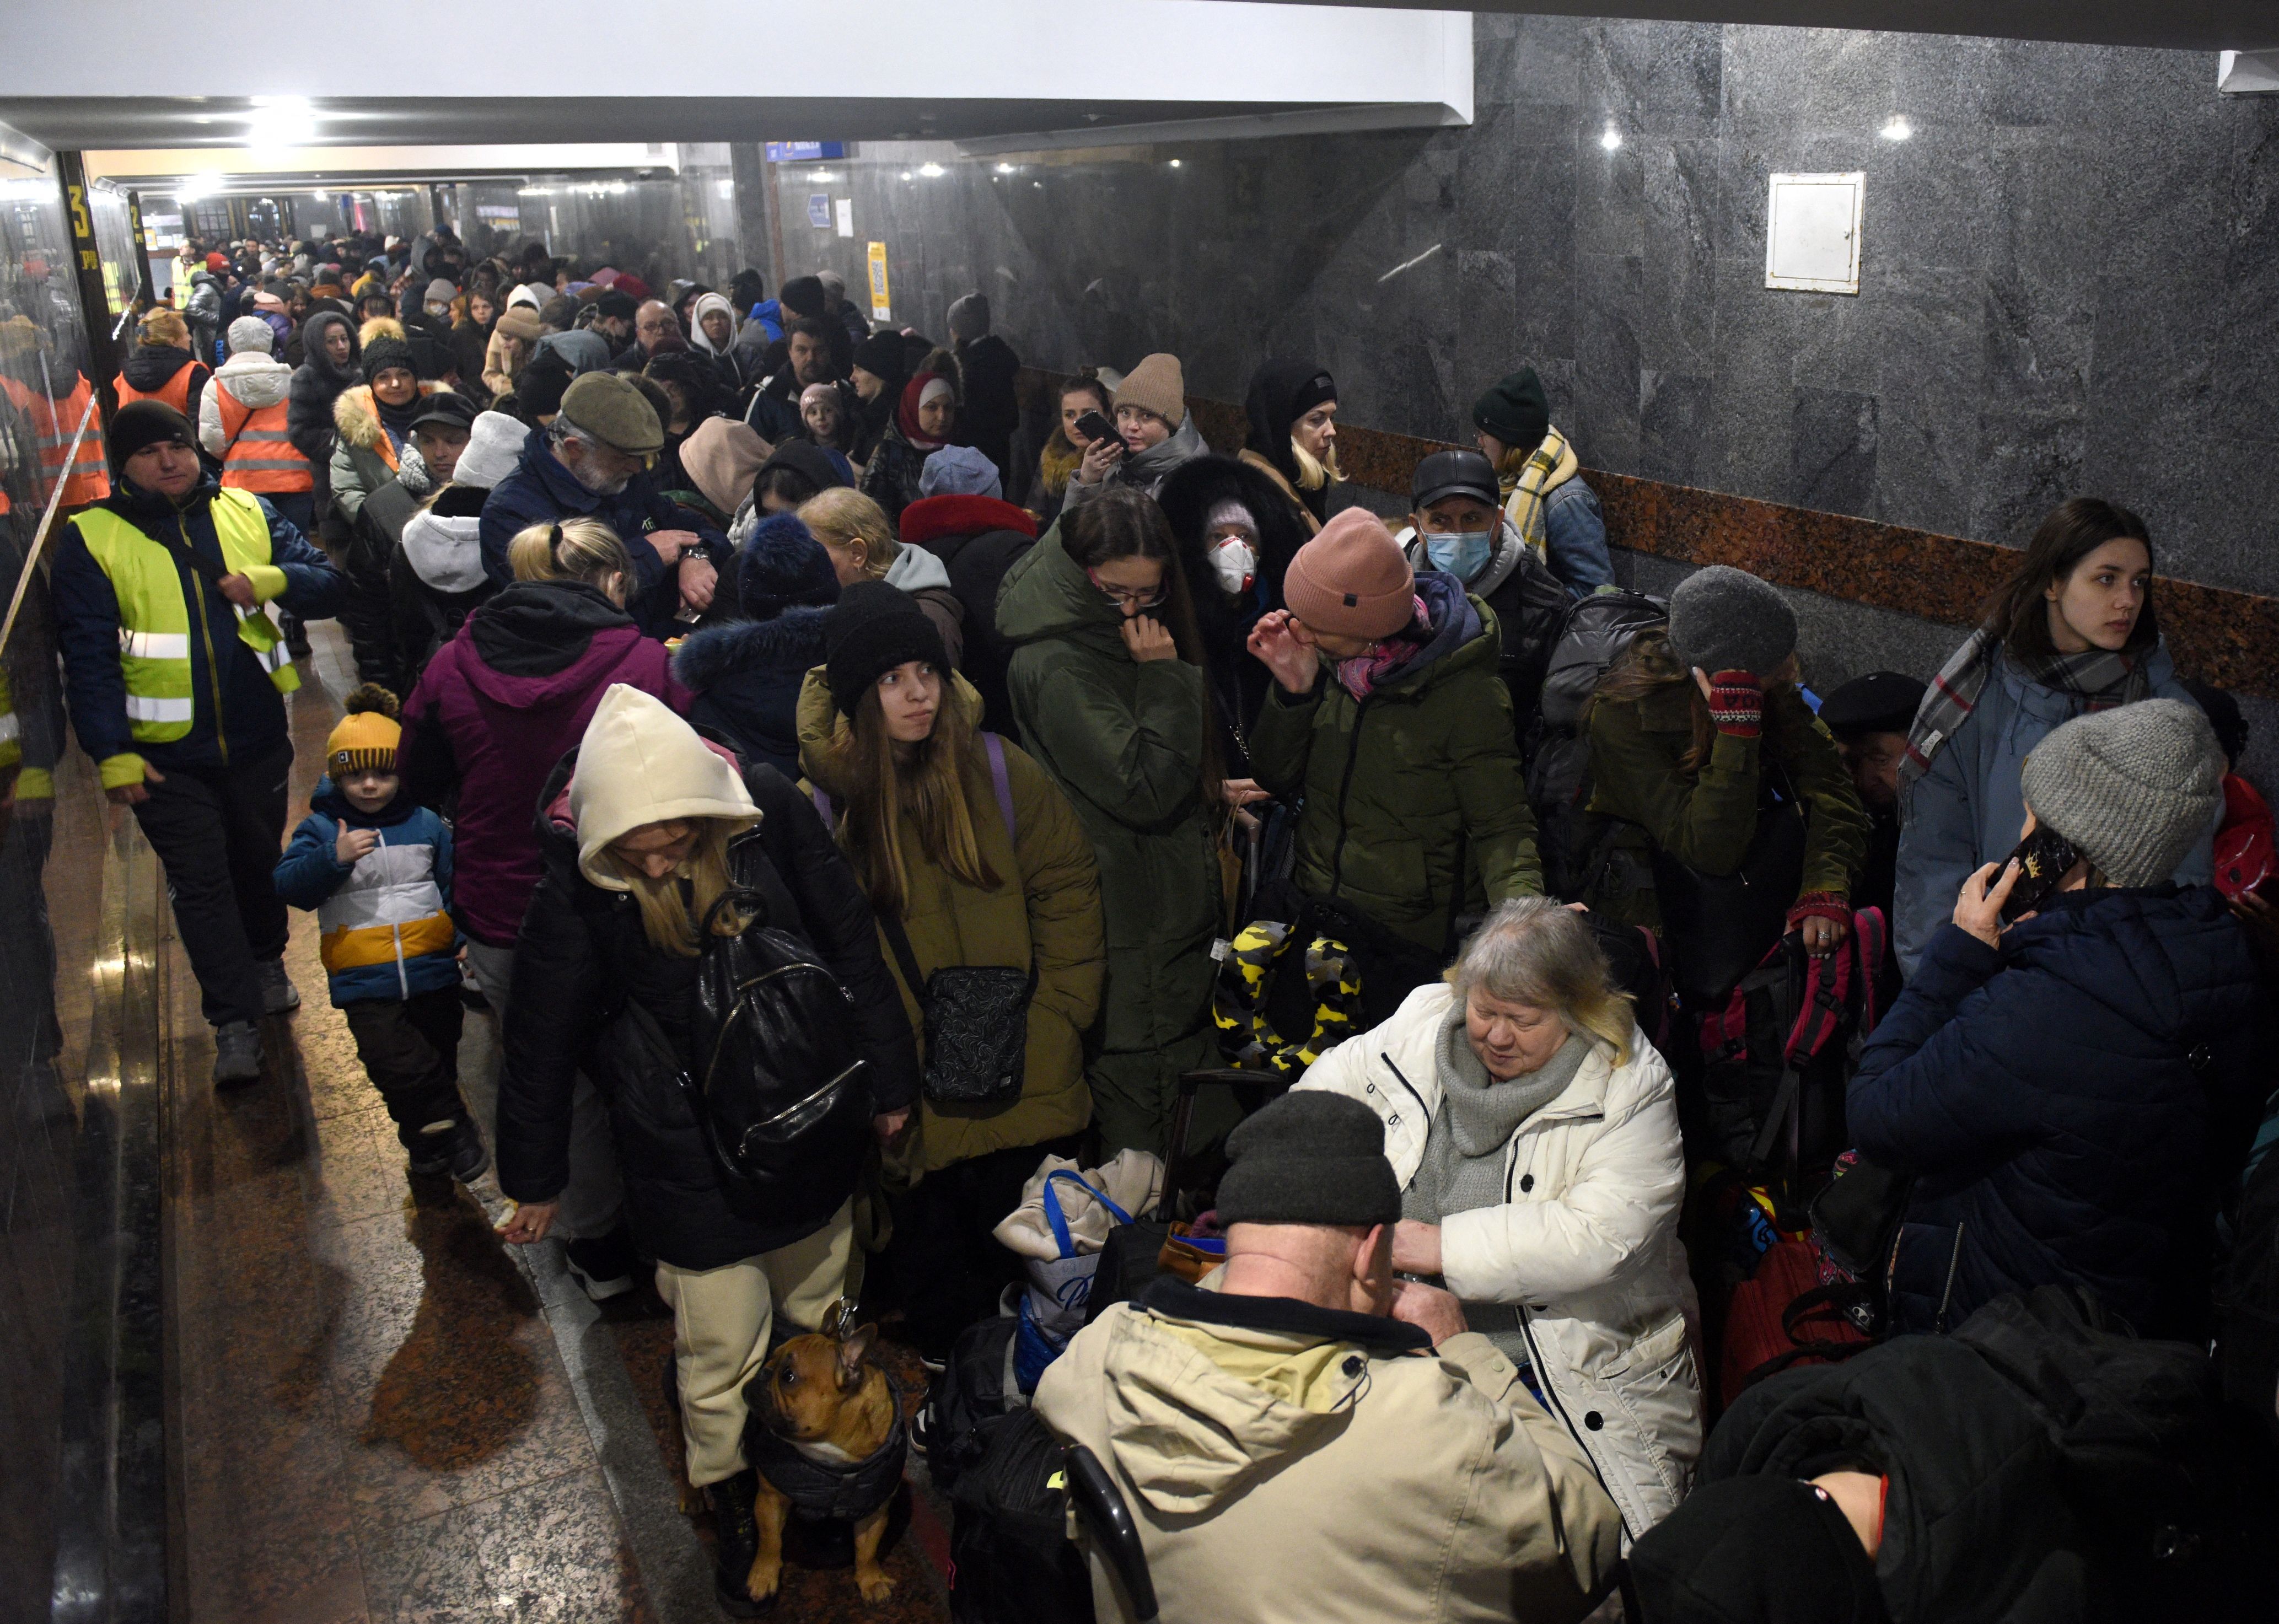  Evacuees from eastern Ukraine wait for a train at the railway station in the western Ukrainian city of Lviv on March 8.